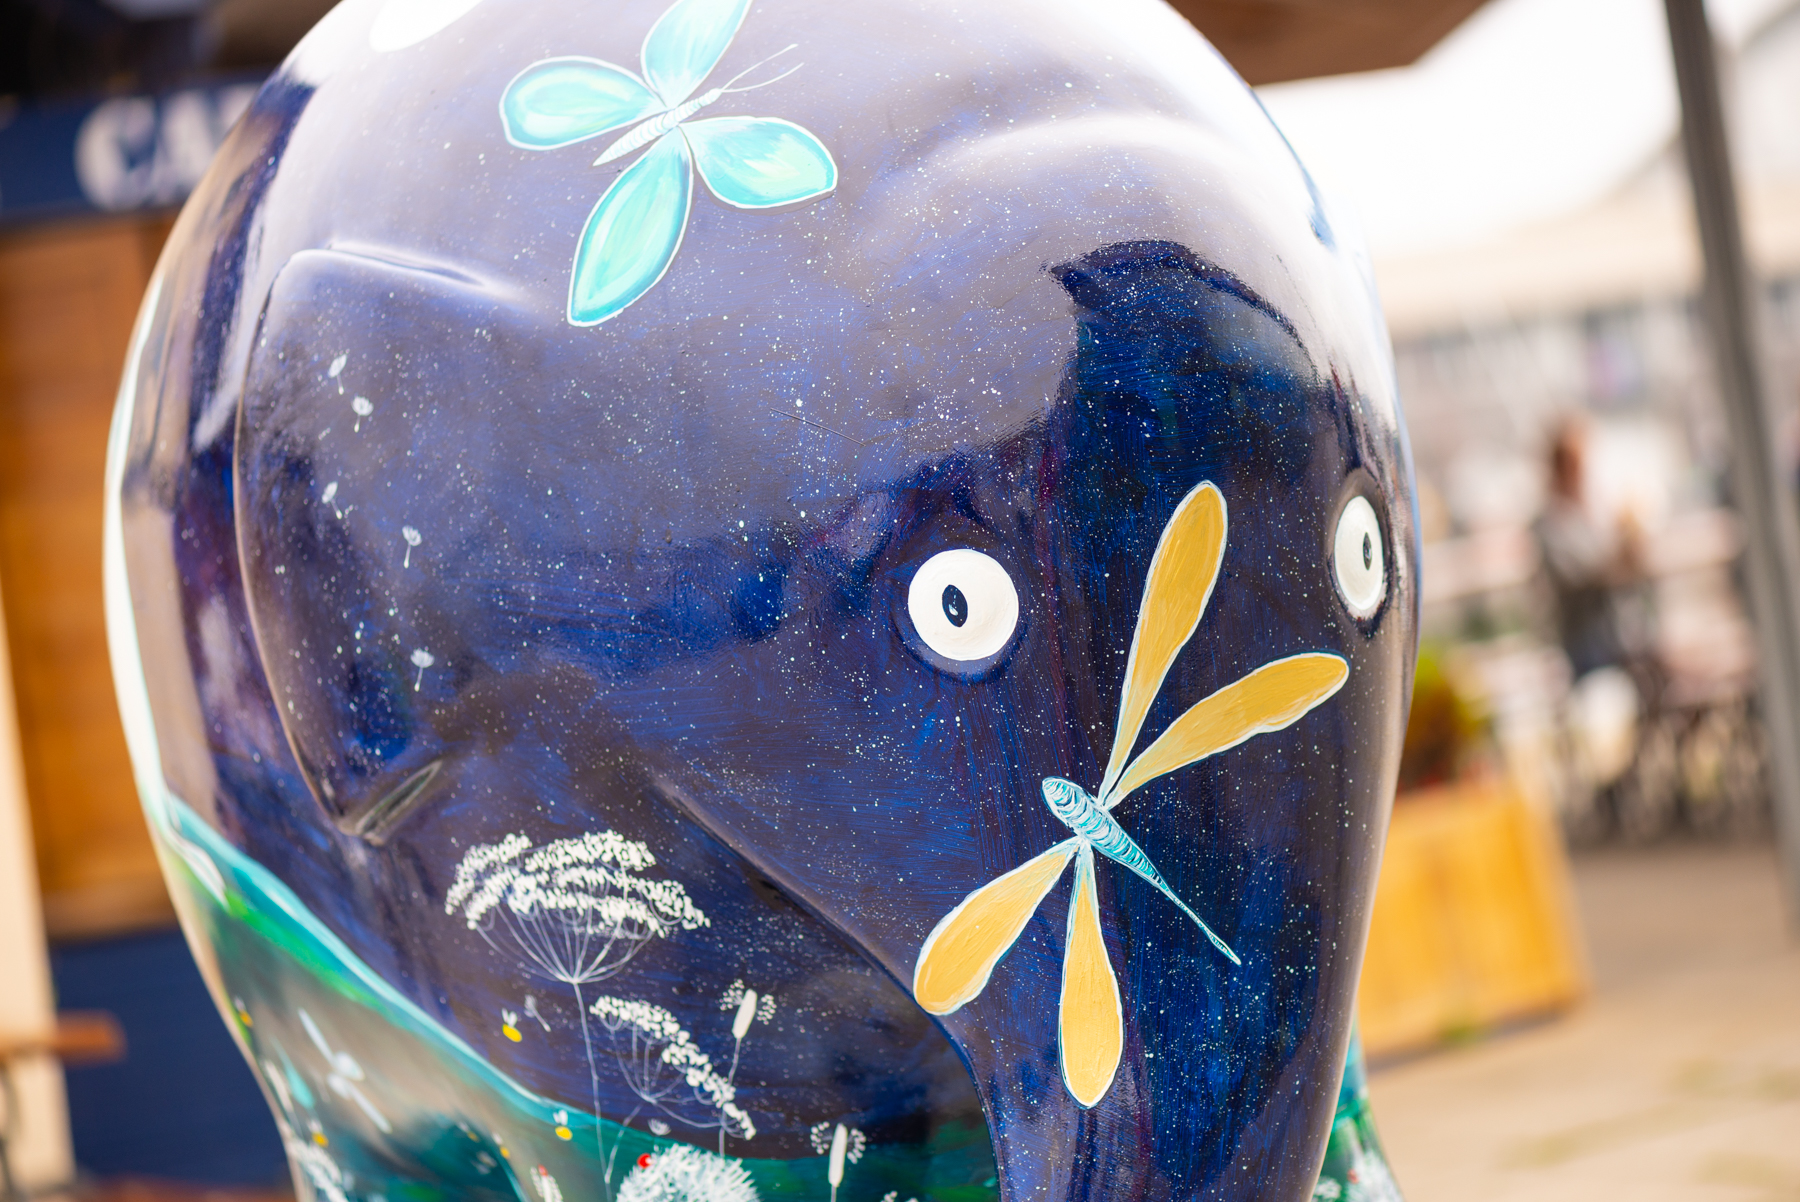 'Zou' by Jess Perrin. Sponsored by Foot Anstey - Image 11 of 16